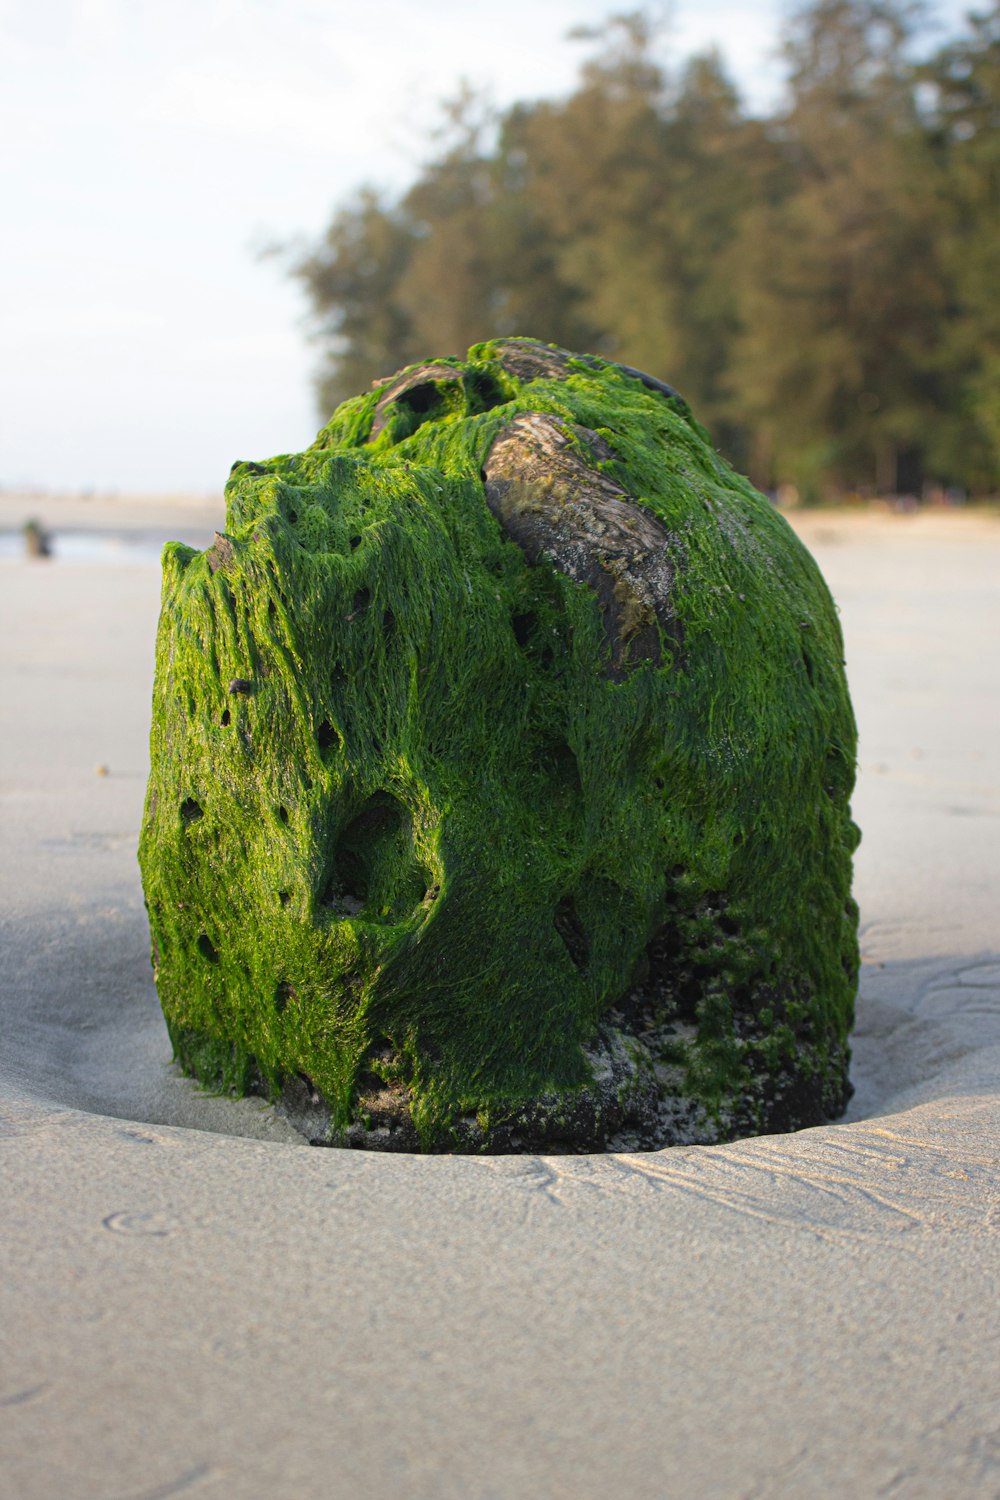 a rock covered in green moss on a beach